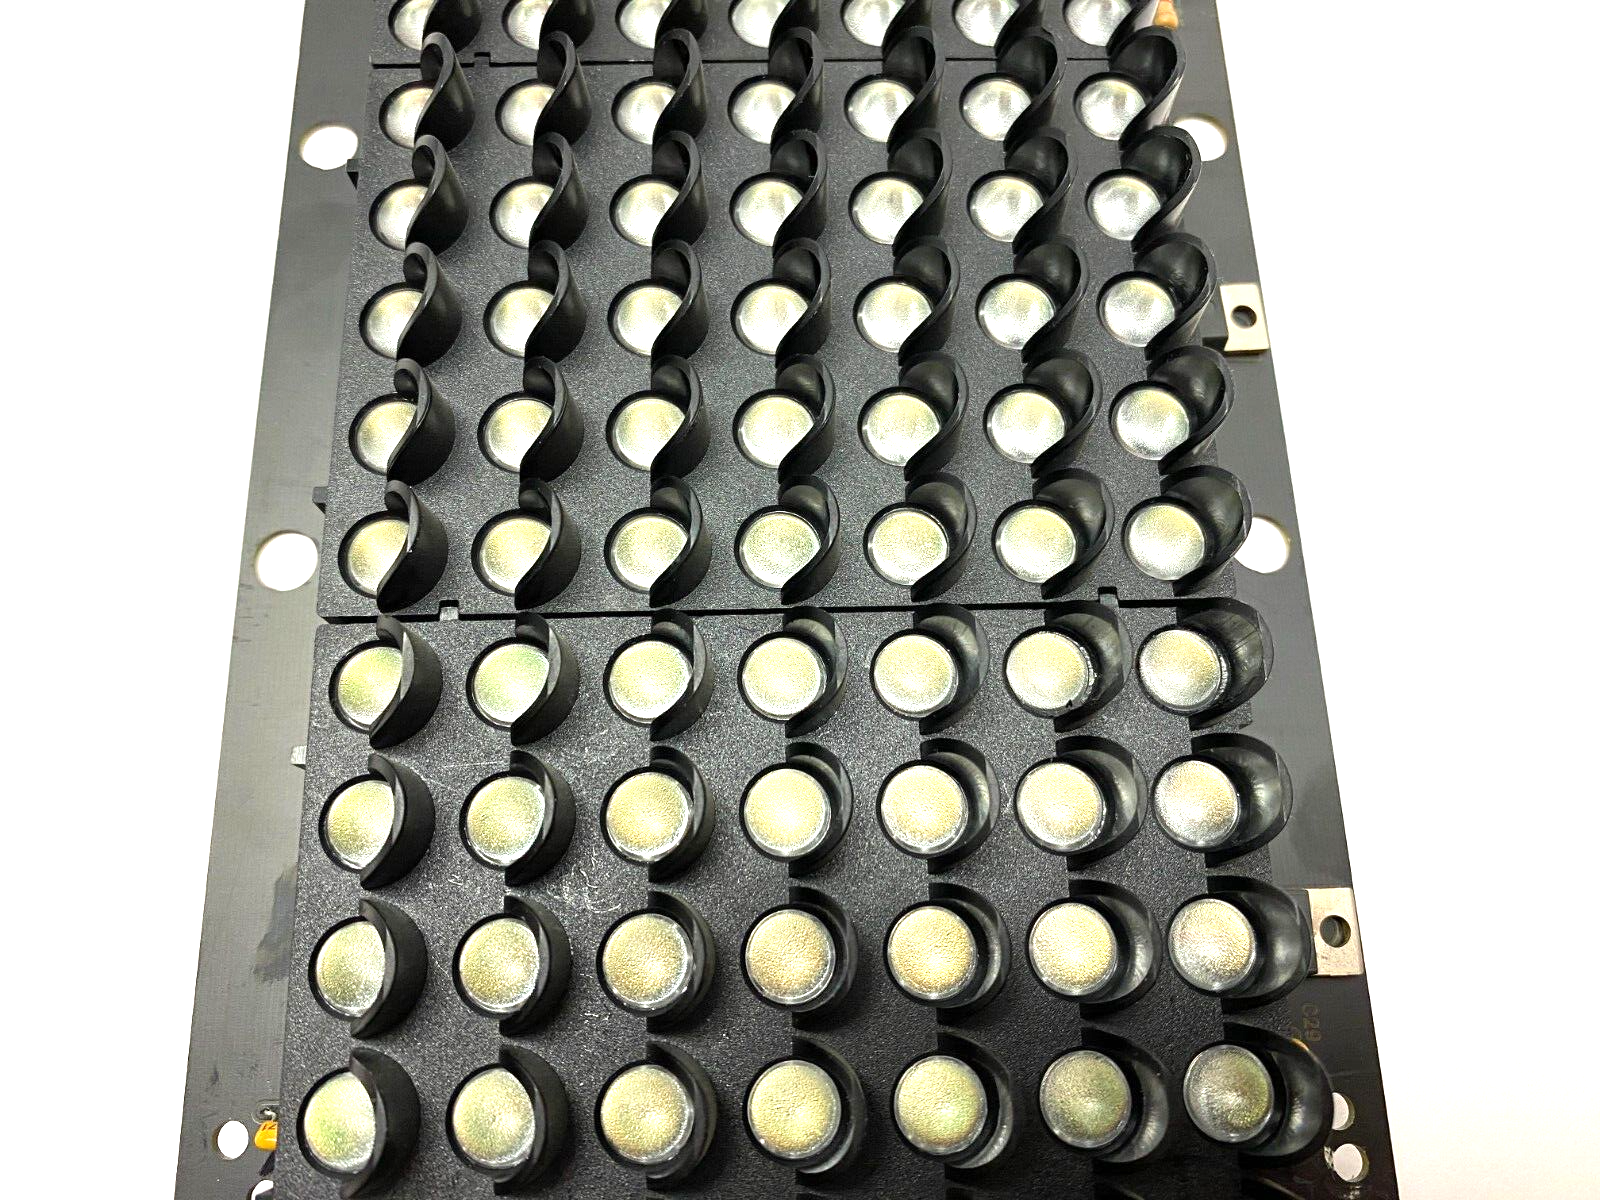 Bystronic 45038007 Rev. E Connectable Scoreboard LED Light Array Display Unit